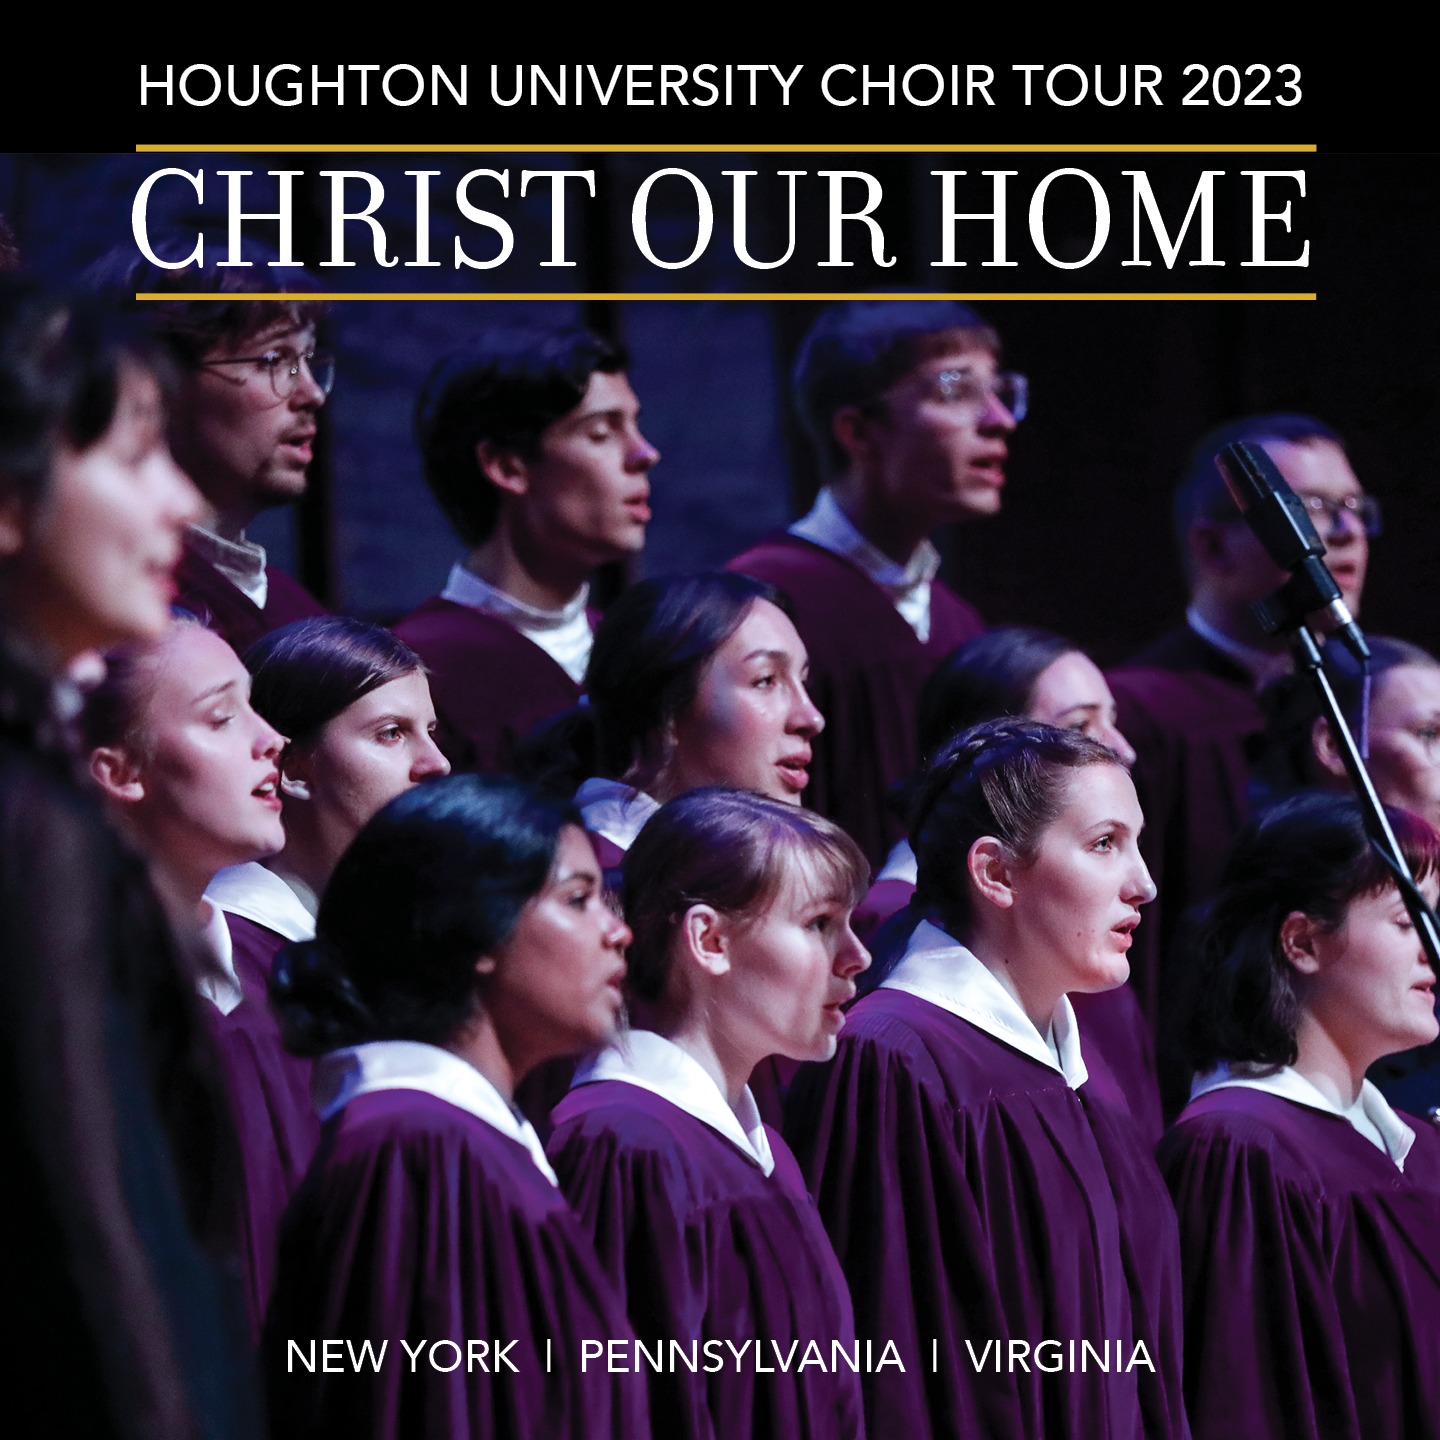 Houghton University Choir Tour 2023: Christ Our Home. Image of our choir, with tour locations in New York, Pennsylvania, and Virginia.